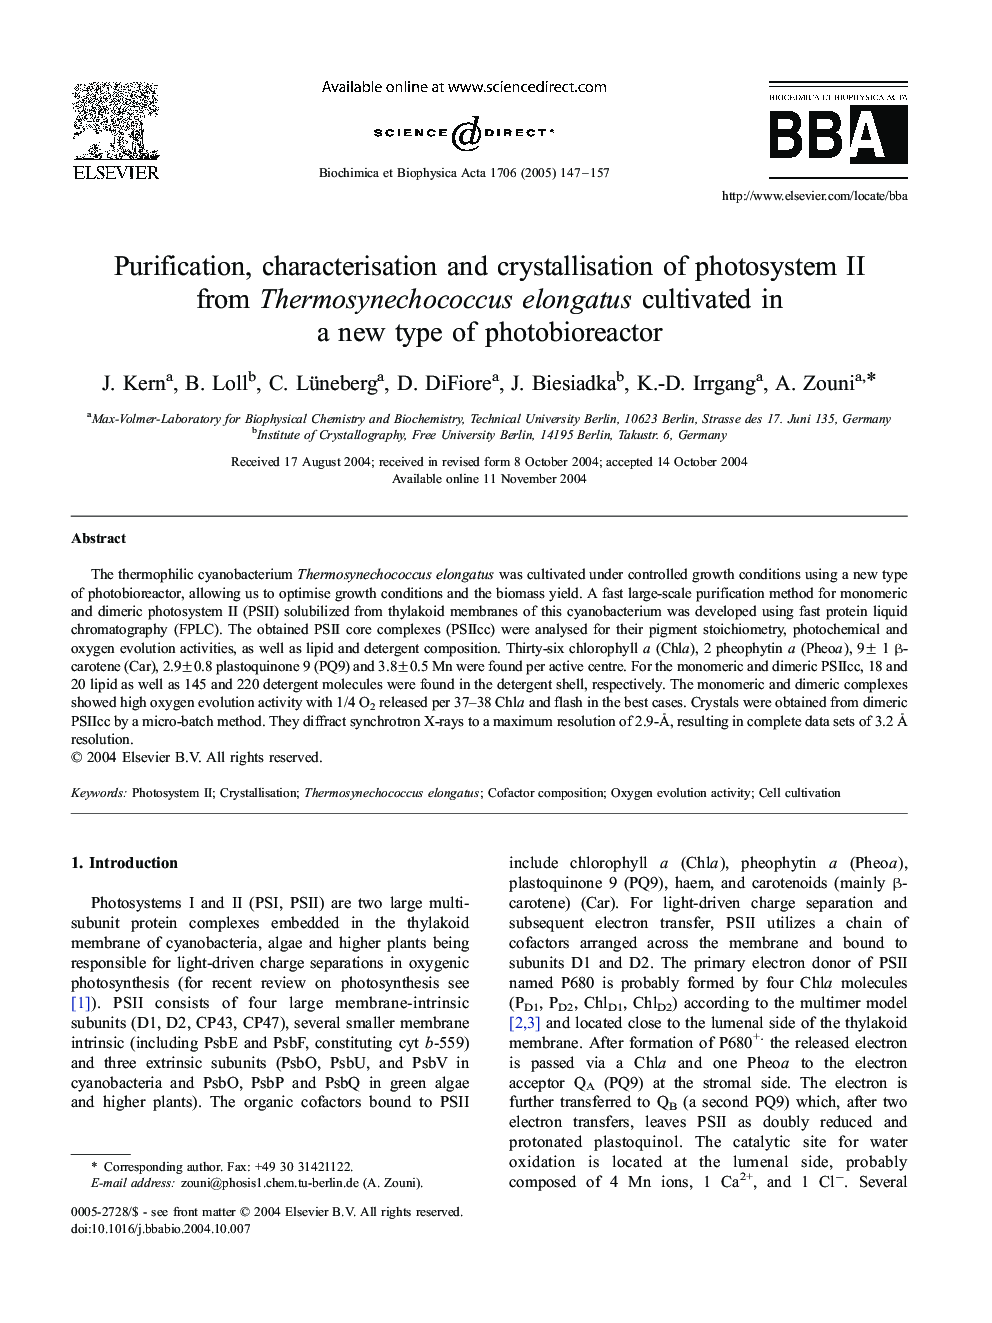 Purification, characterisation and crystallisation of photosystem II from Thermosynechococcus elongatus cultivated in a new type of photobioreactor